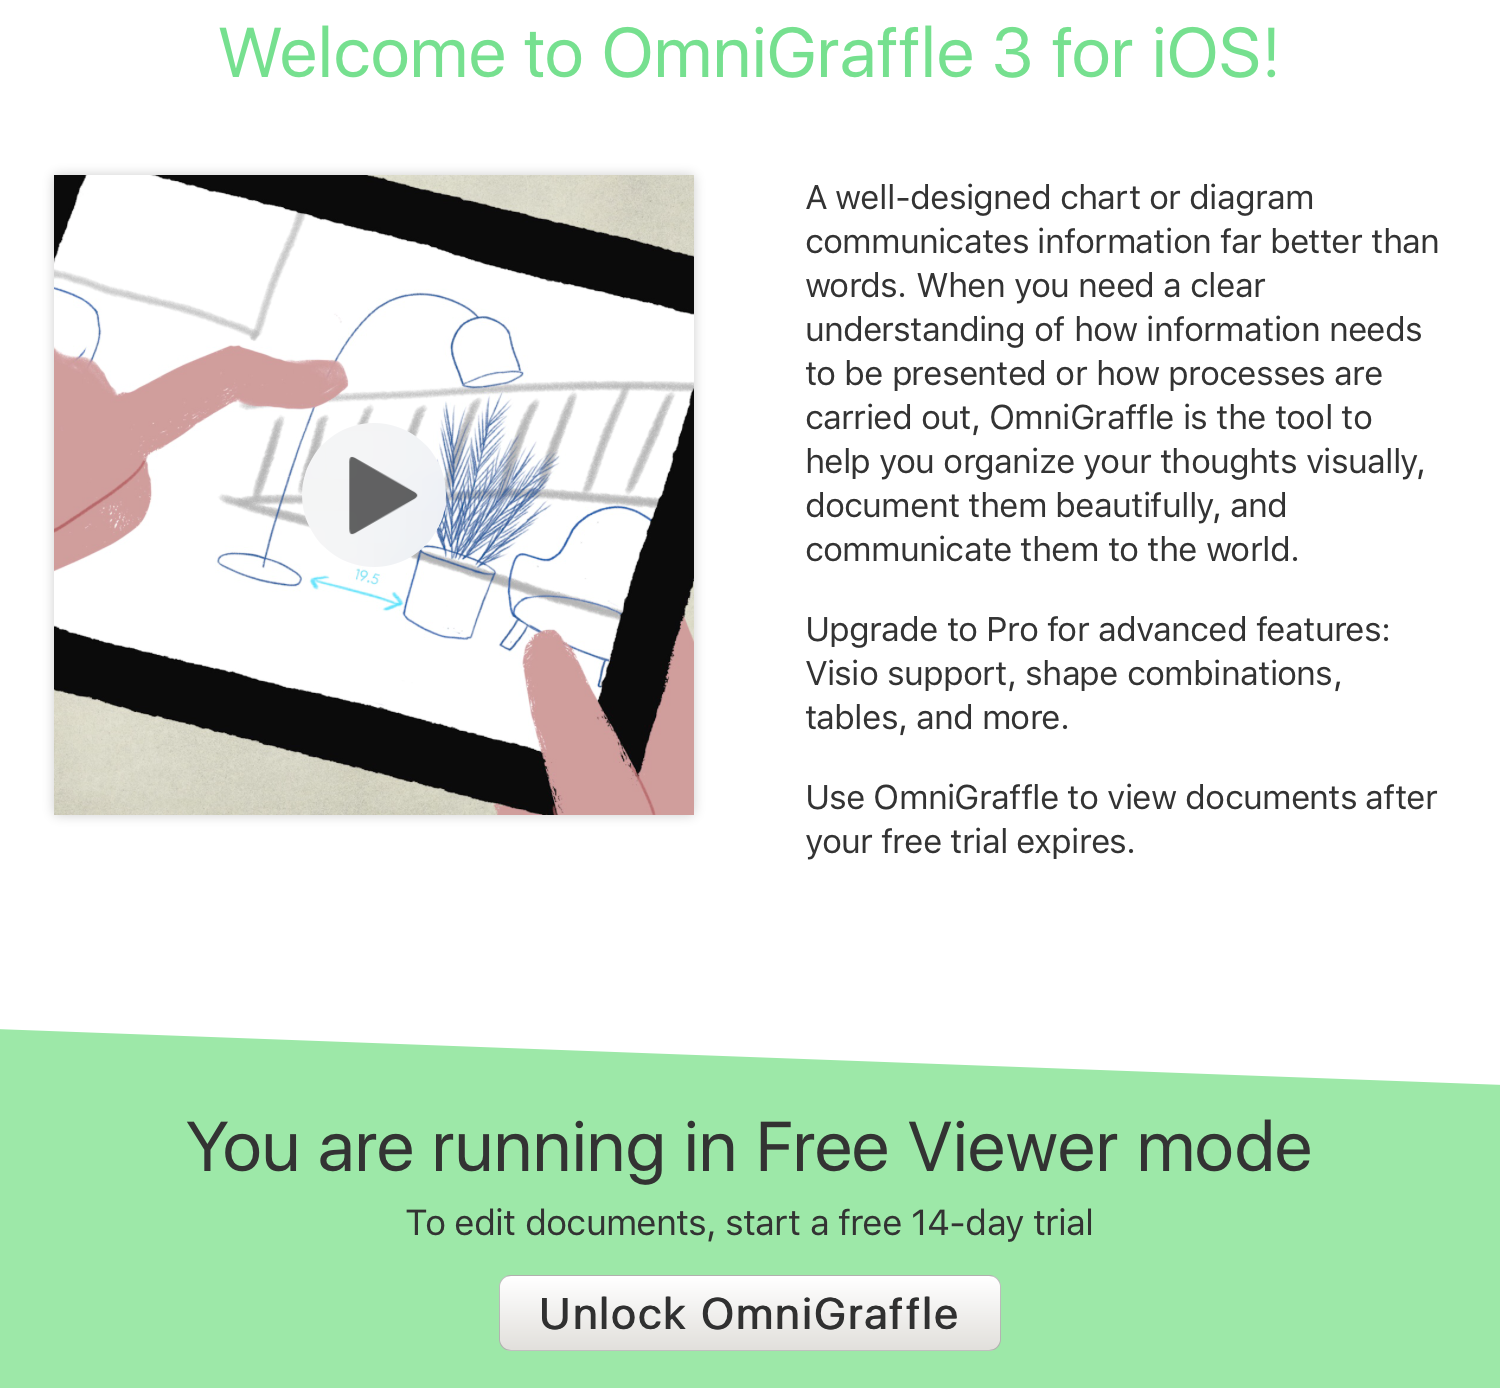 Welcome to OmniGraffle 3 for iOS